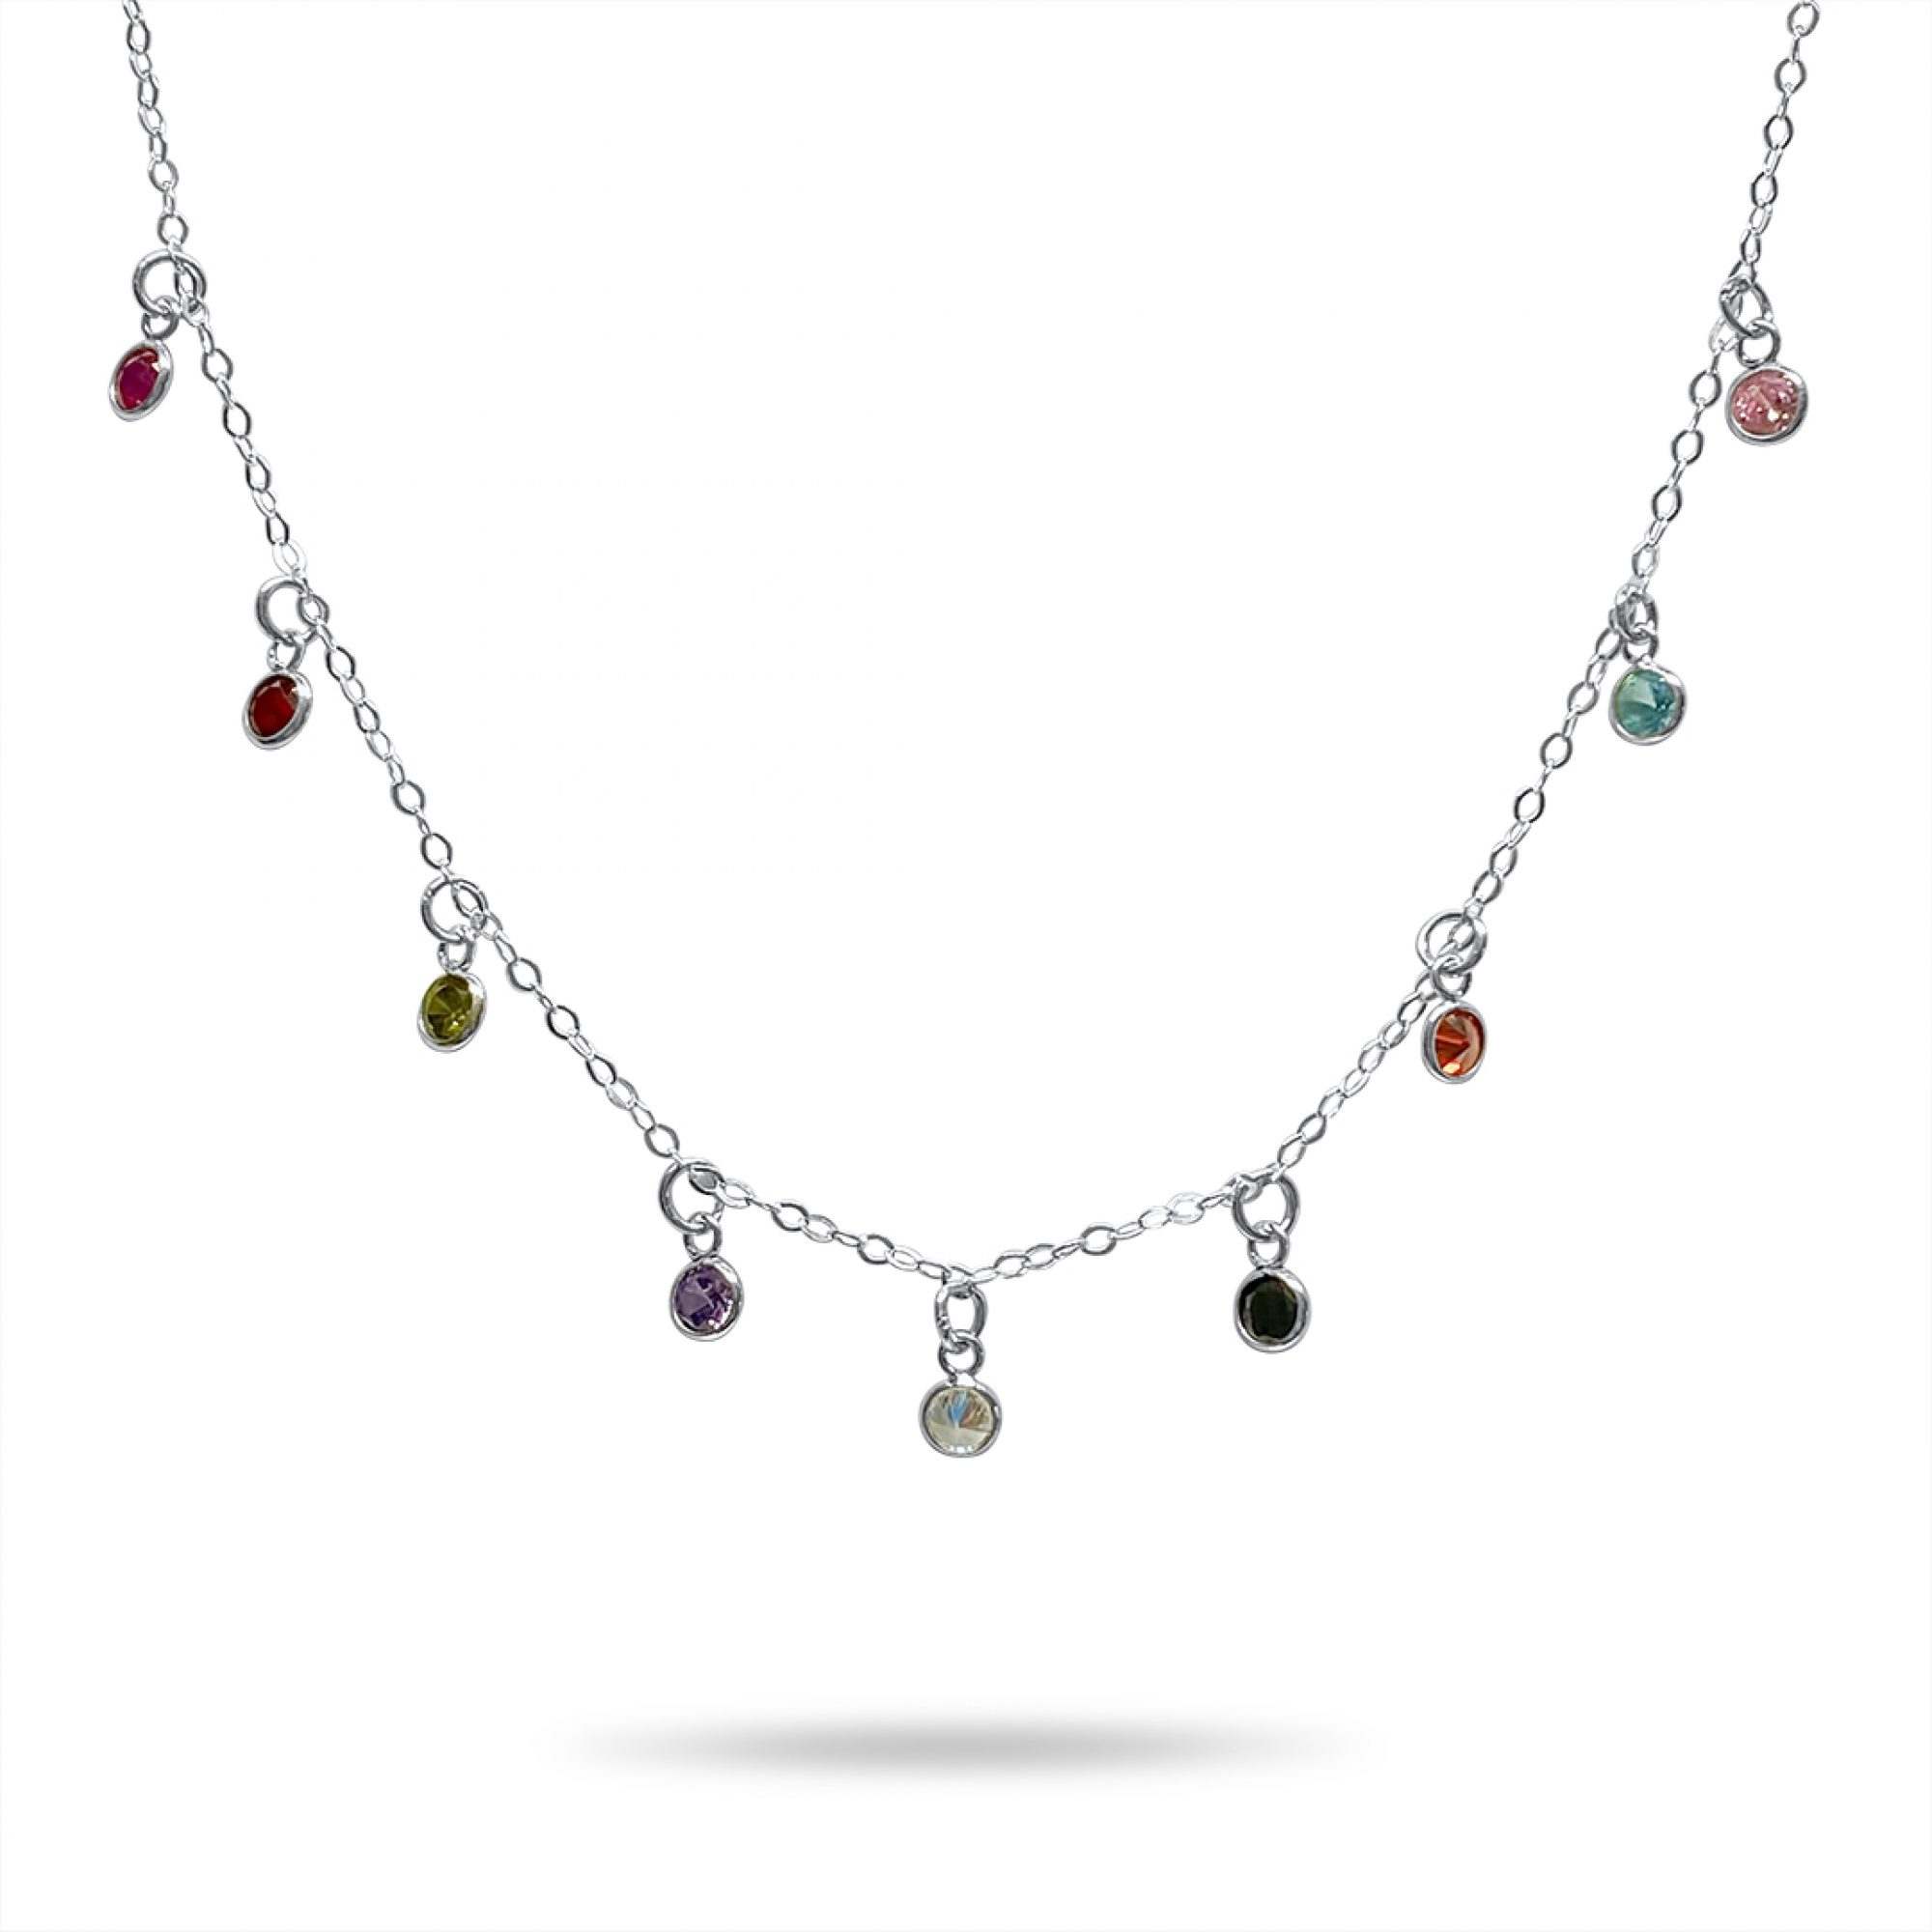 Dangle necklace with multicoloured stones